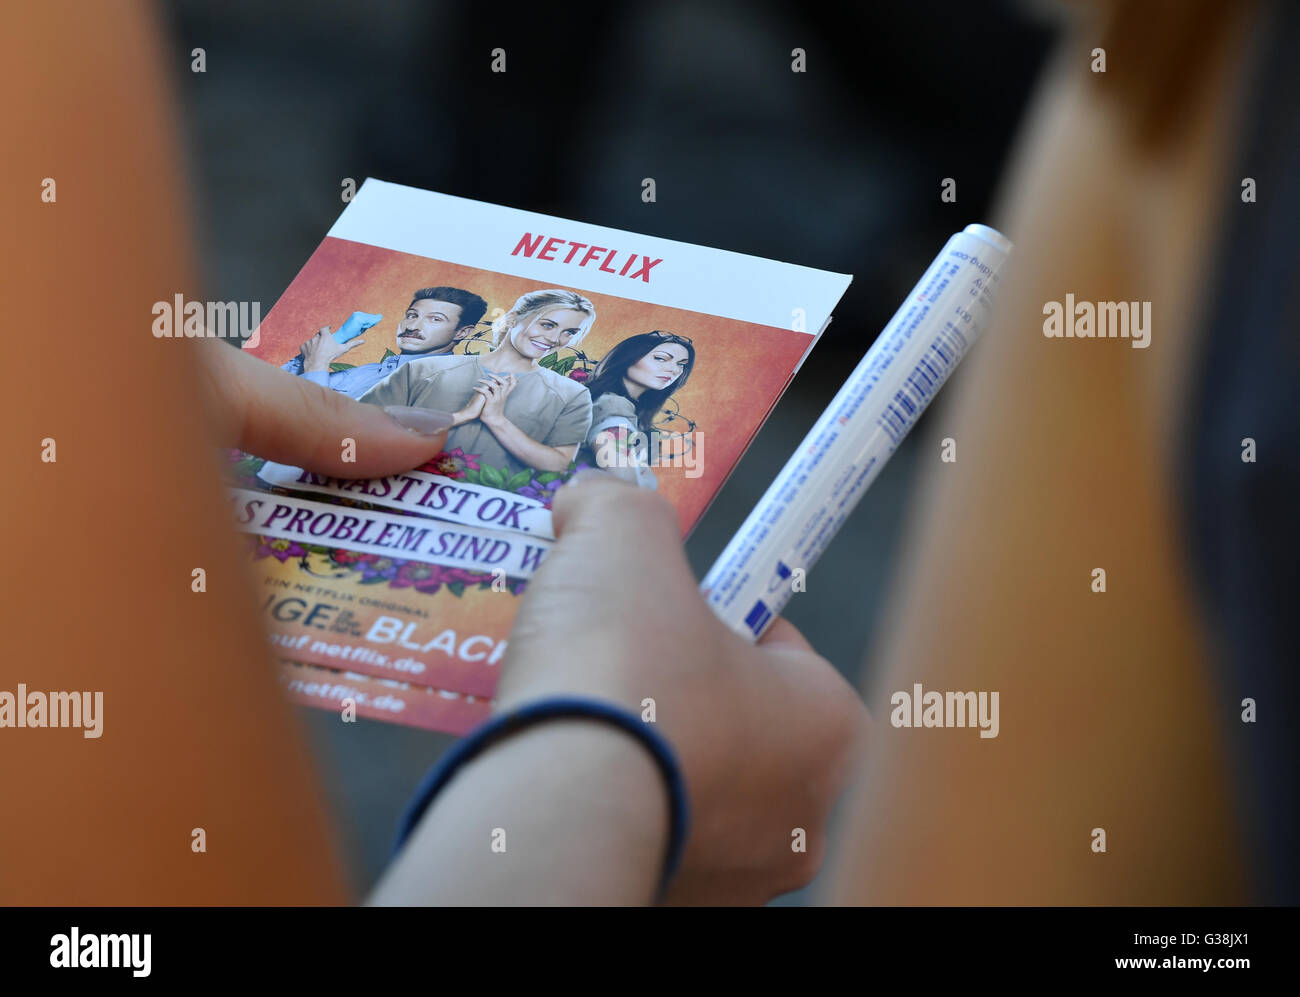 Fans wait with flyers by streaming provider Netflix in their hands at the premiere of the Netflix series 'Orange is the new Black - 4th series' in Berlin, 7 June 2016. Netflix is the worldwide leading subscription service for mobile streaming of movies and series. Photo: Jens Kalaene/dpa Stock Photo